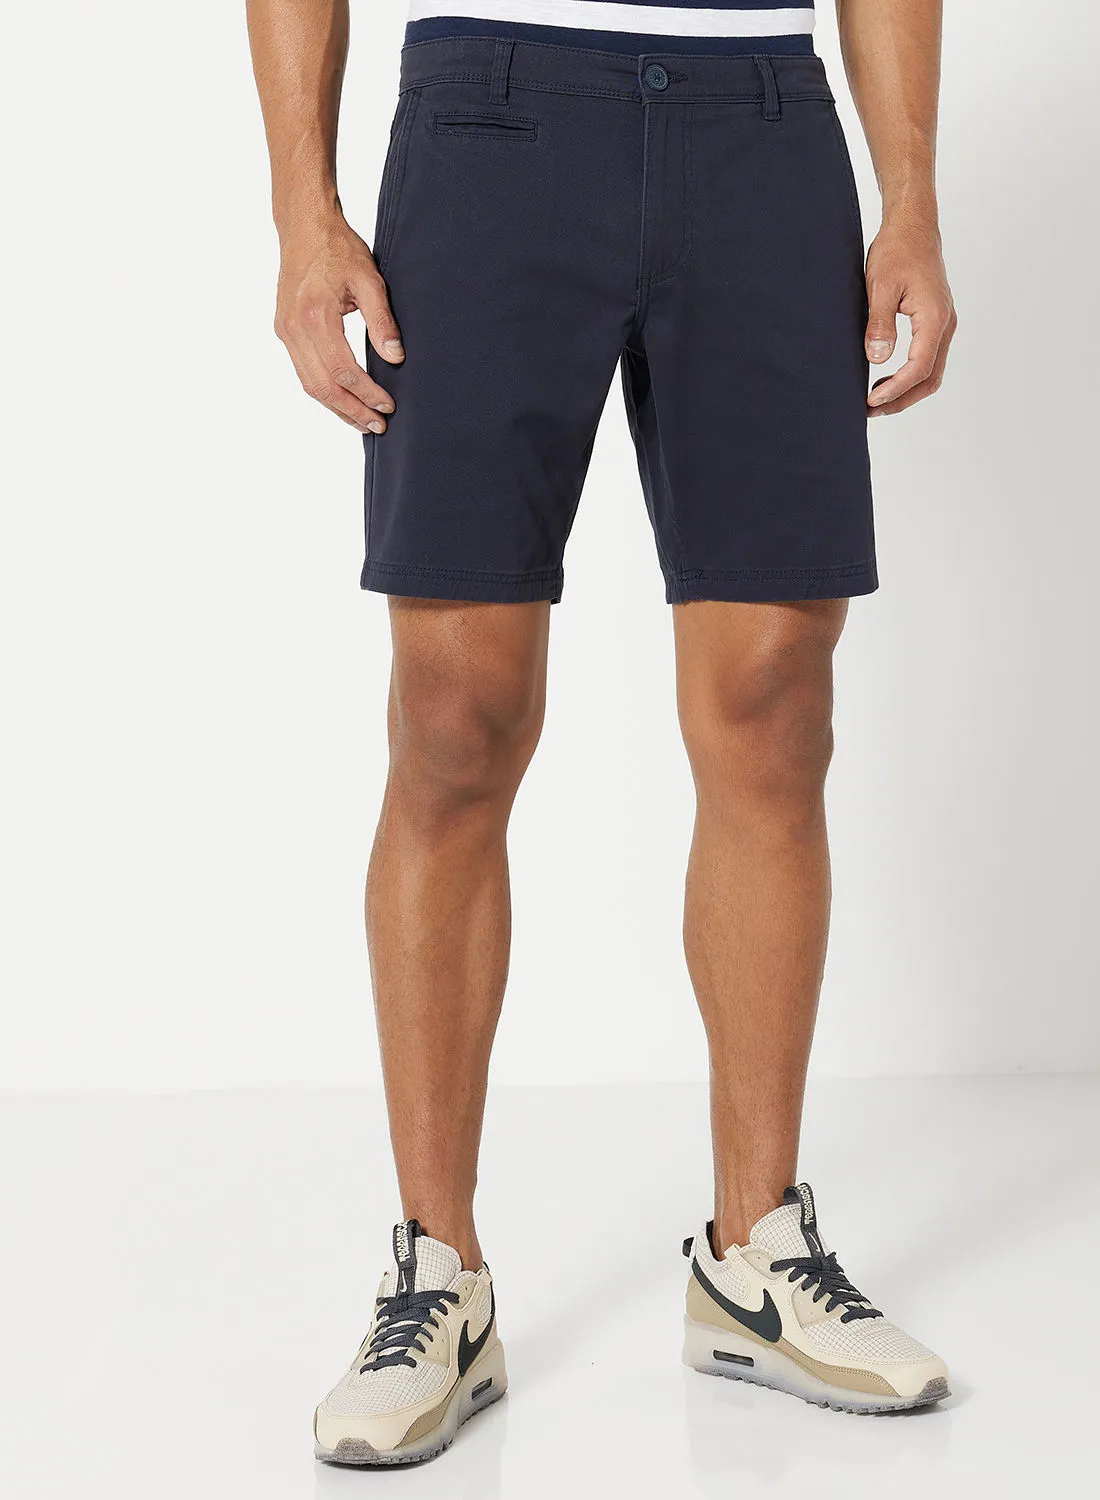 Noon East Solid Pattern Premium Shorts Navy Blue